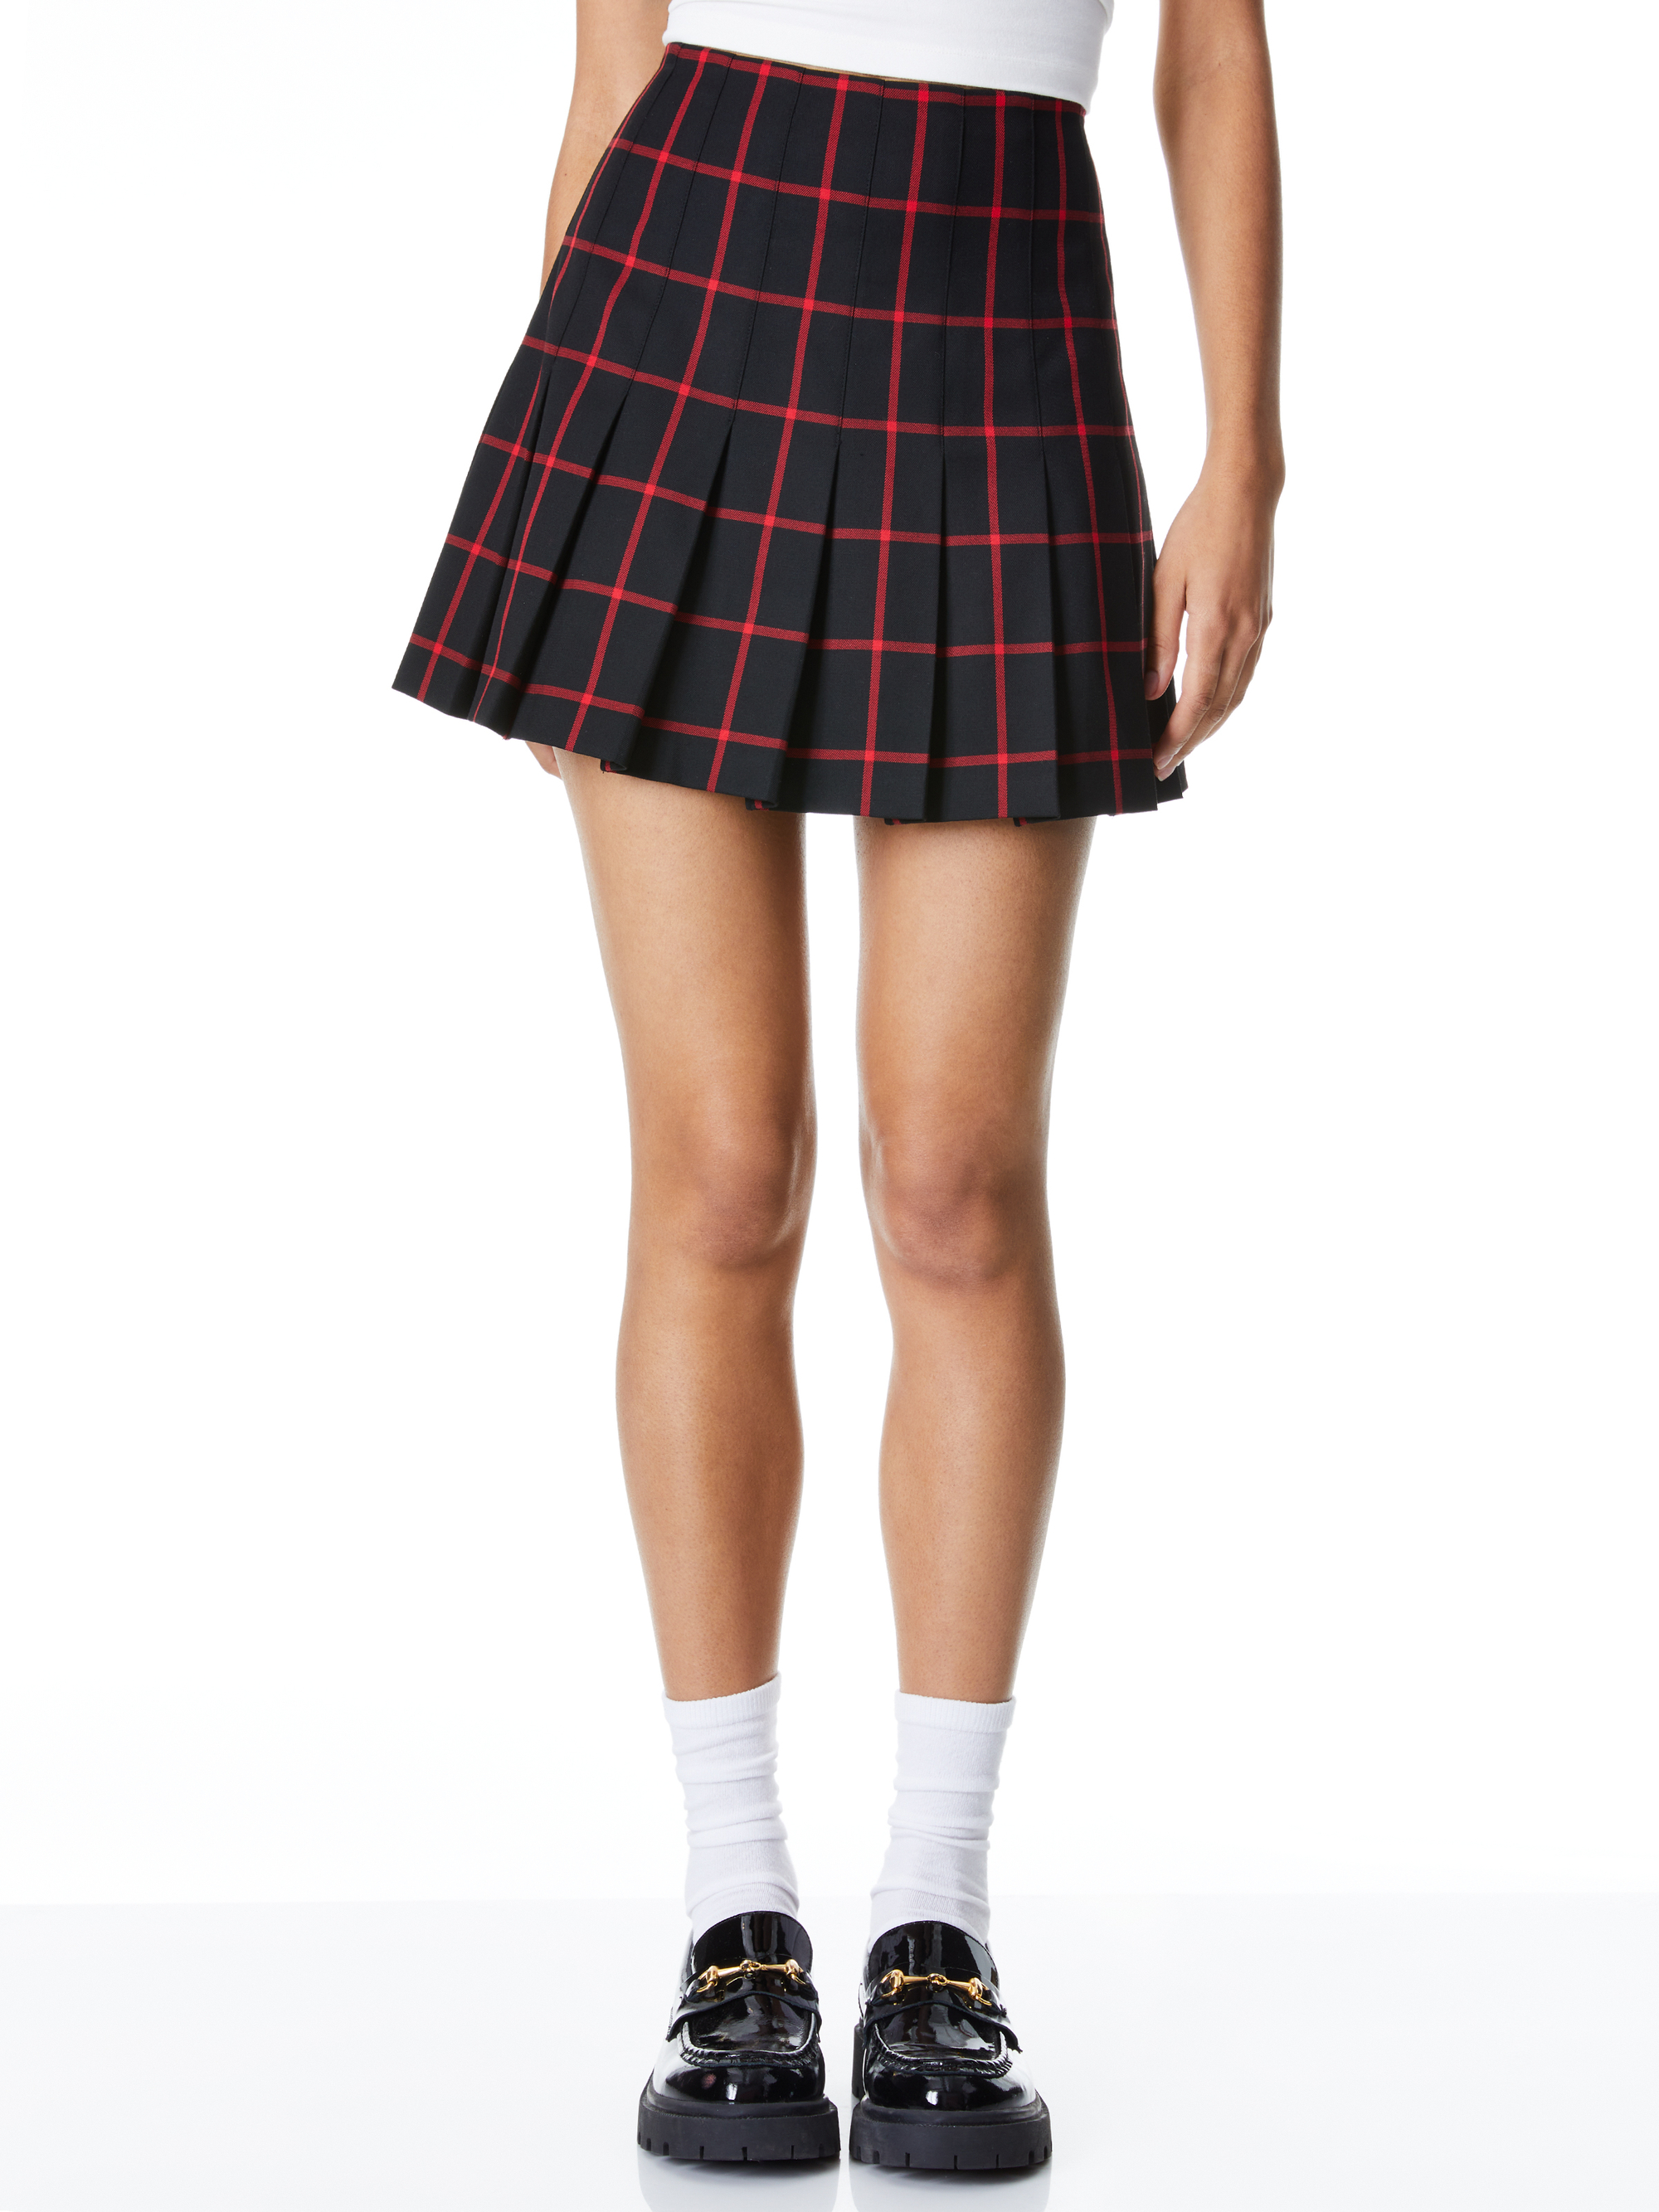 CARTER PLEATED MINI SKIRT - BLACK/PERFECT RUBY - Alice And Olivia